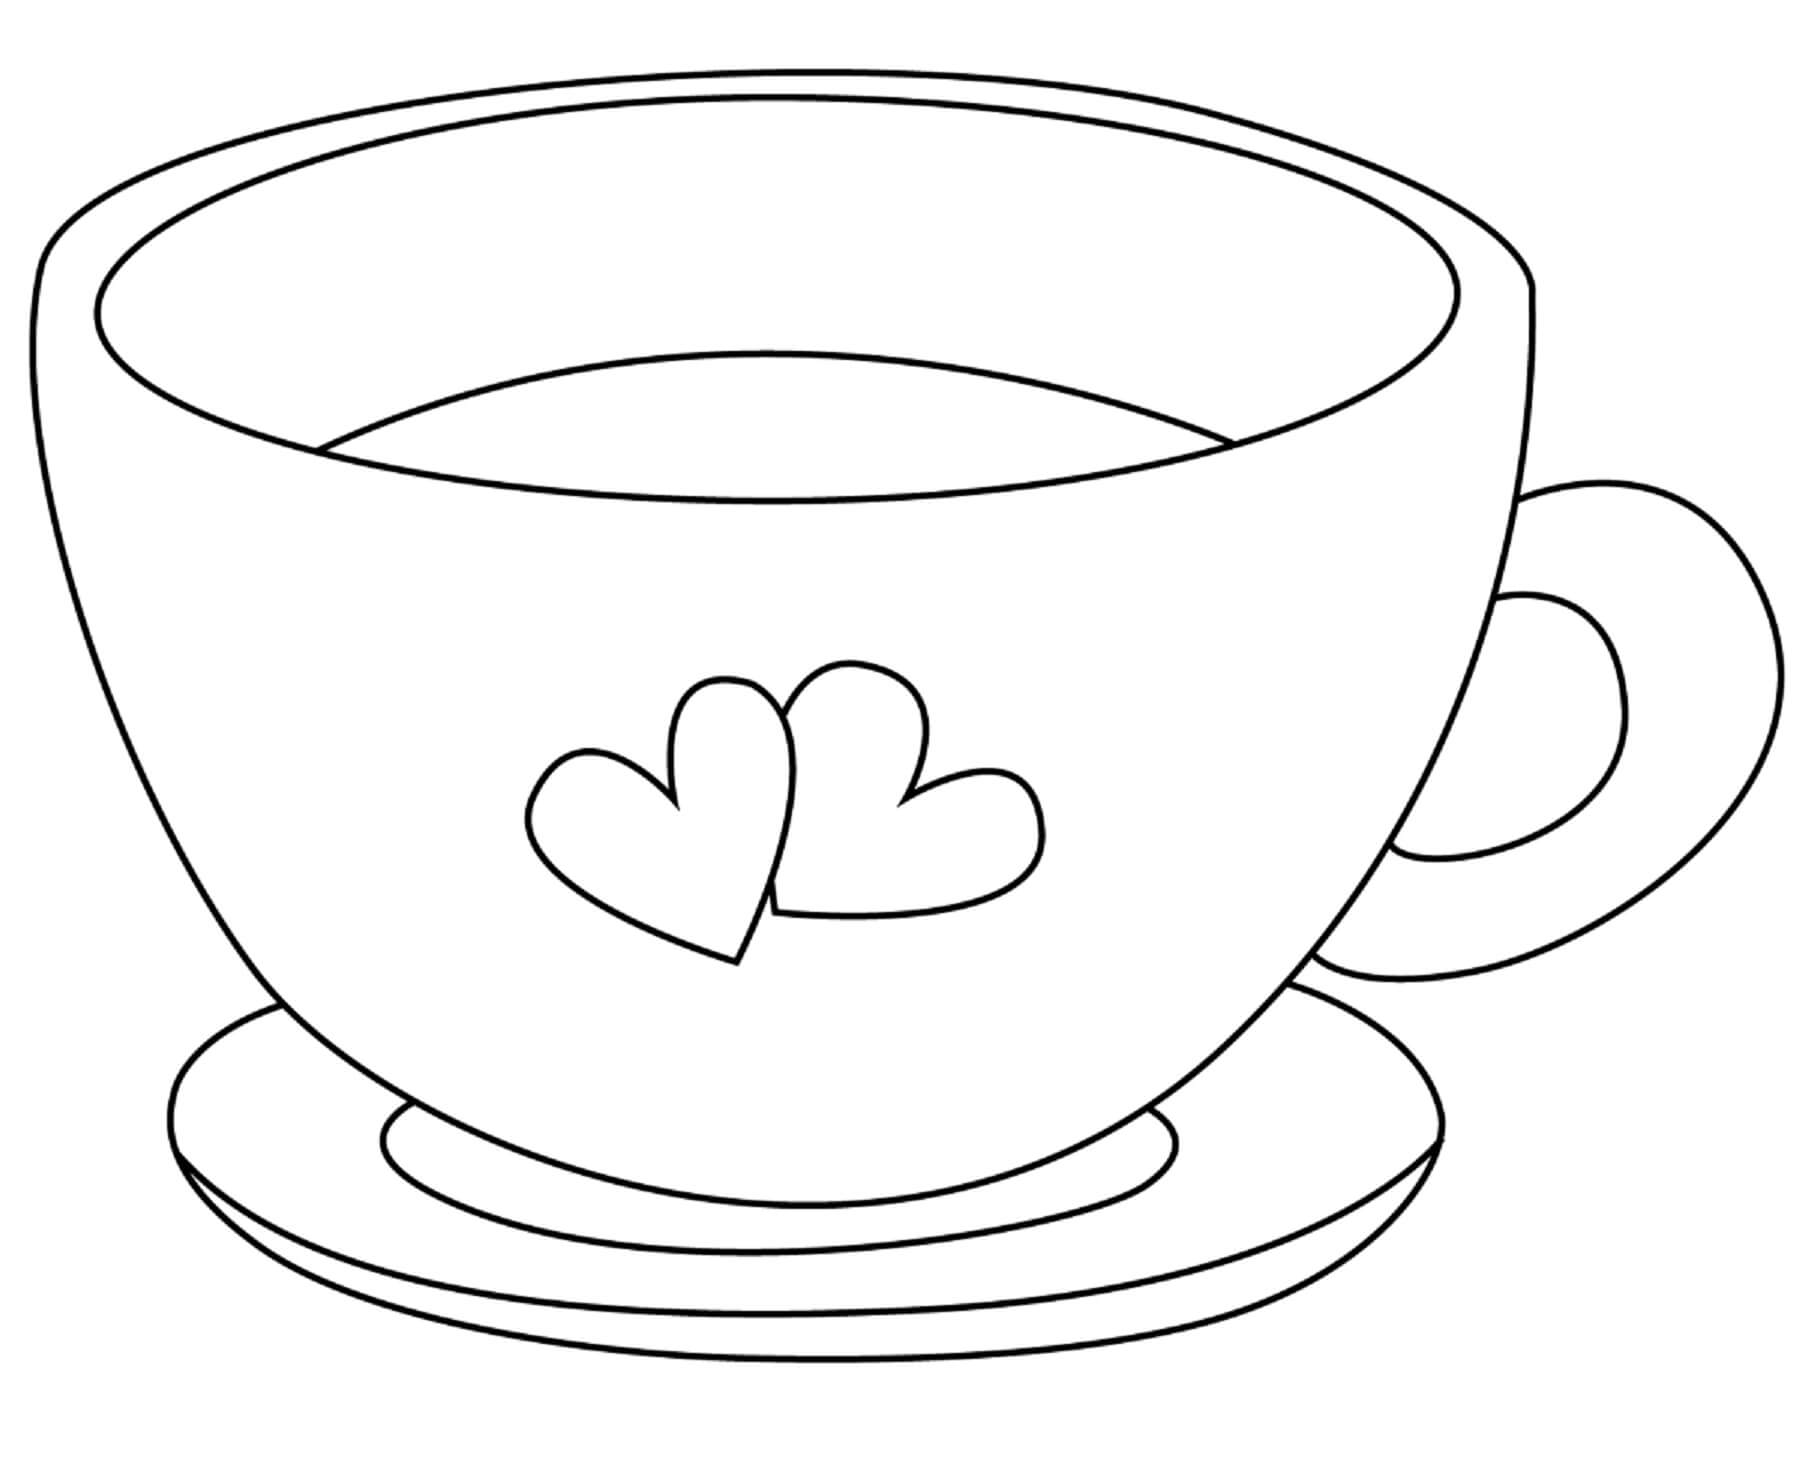 Perfect Cup coloring page - Download, Print or Color Online for Free